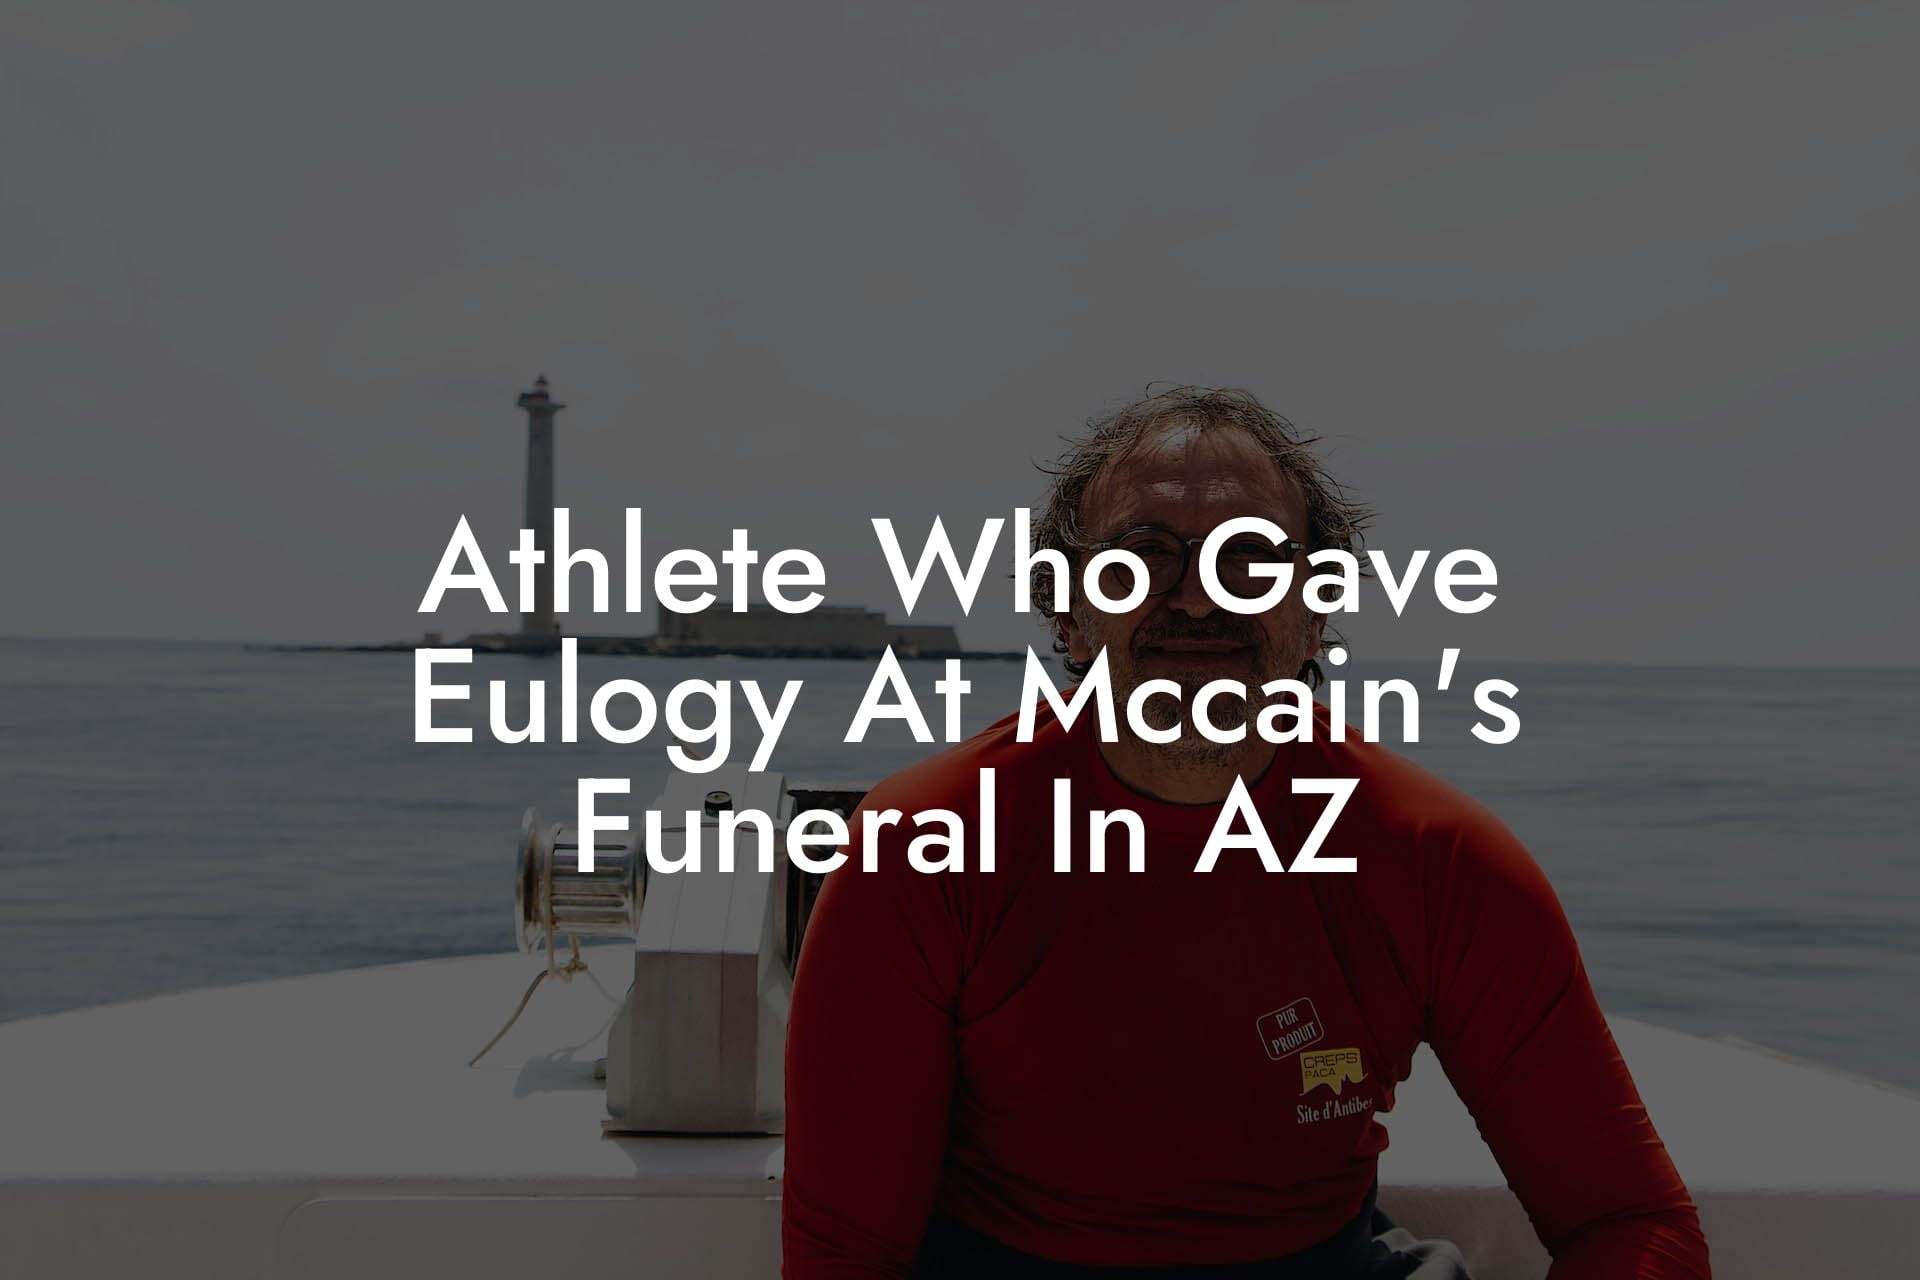 Athlete Who Gave Eulogy At Mccain's Funeral In AZ